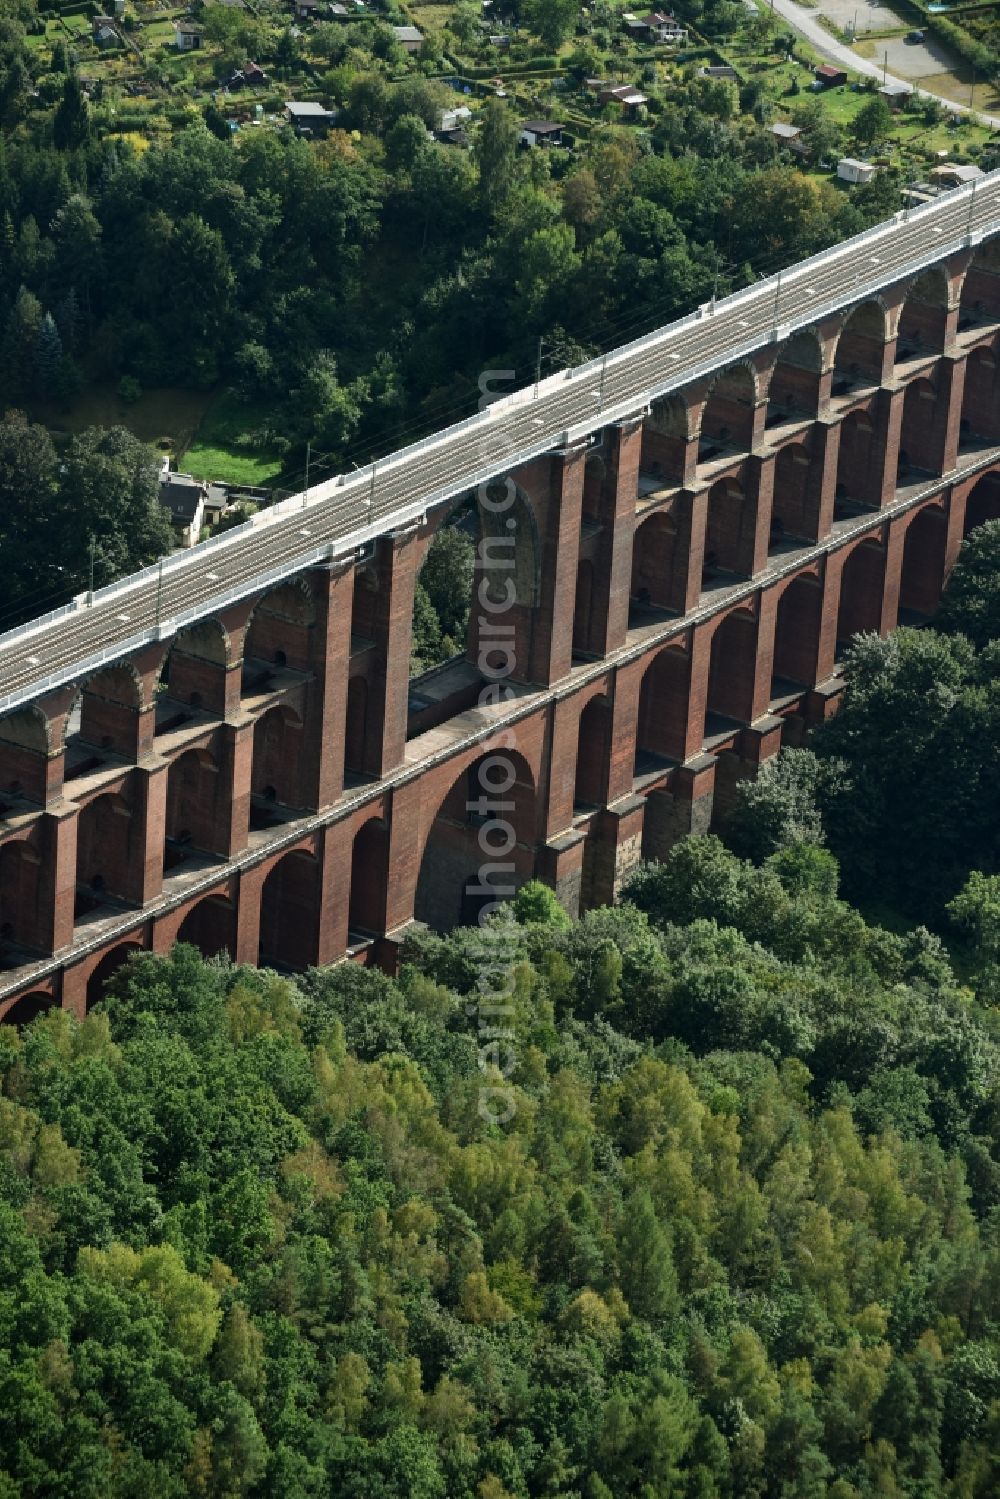 Netzschkau from above - Viaduct of the railway bridge structure to route the railway tracks in Netzschkau in the state Saxony, Germany